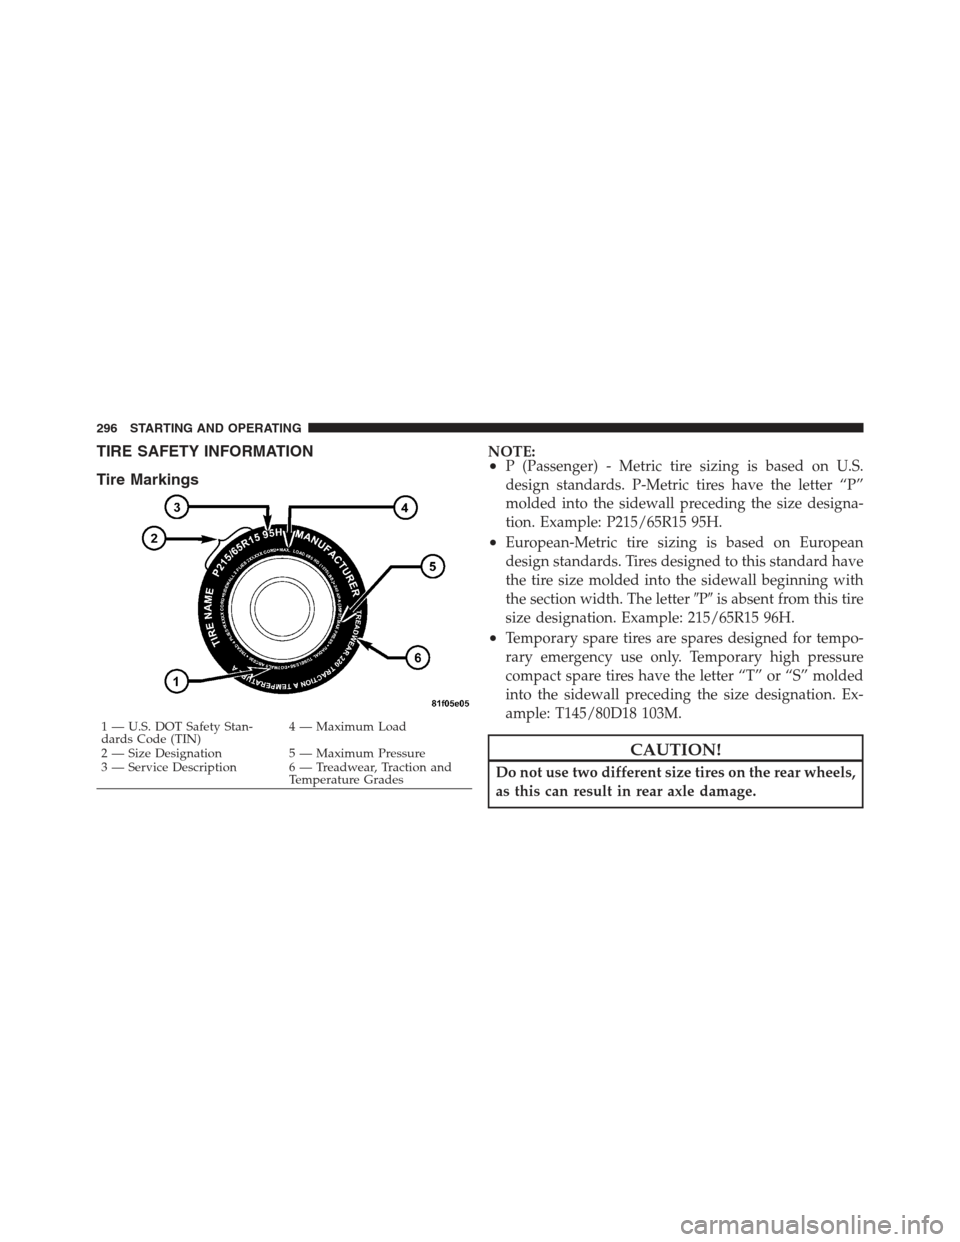 DODGE CHALLENGER 2012 3.G Owners Manual TIRE SAFETY INFORMATION
Tire MarkingsNOTE:•P (Passenger) - Metric tire sizing is based on U.S.
design standards. P-Metric tires have the letter “P”
molded into the sidewall preceding the size de